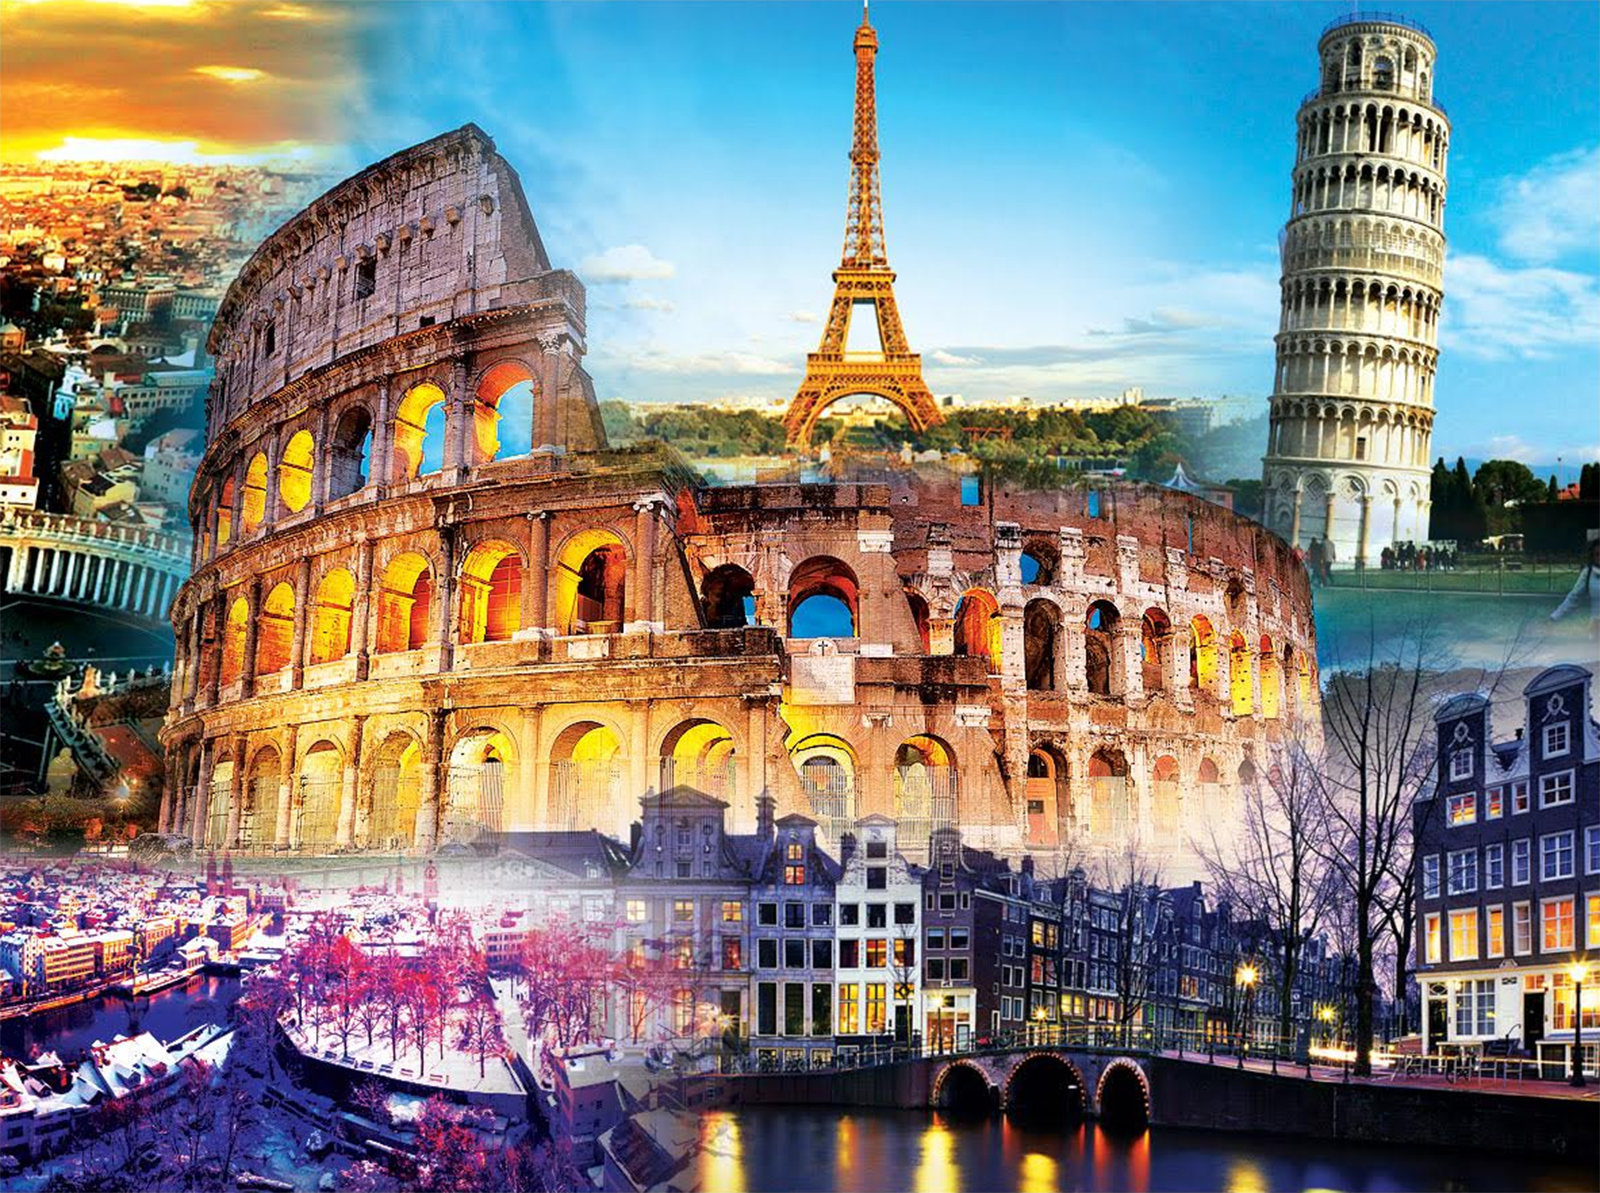 europe vacation packages